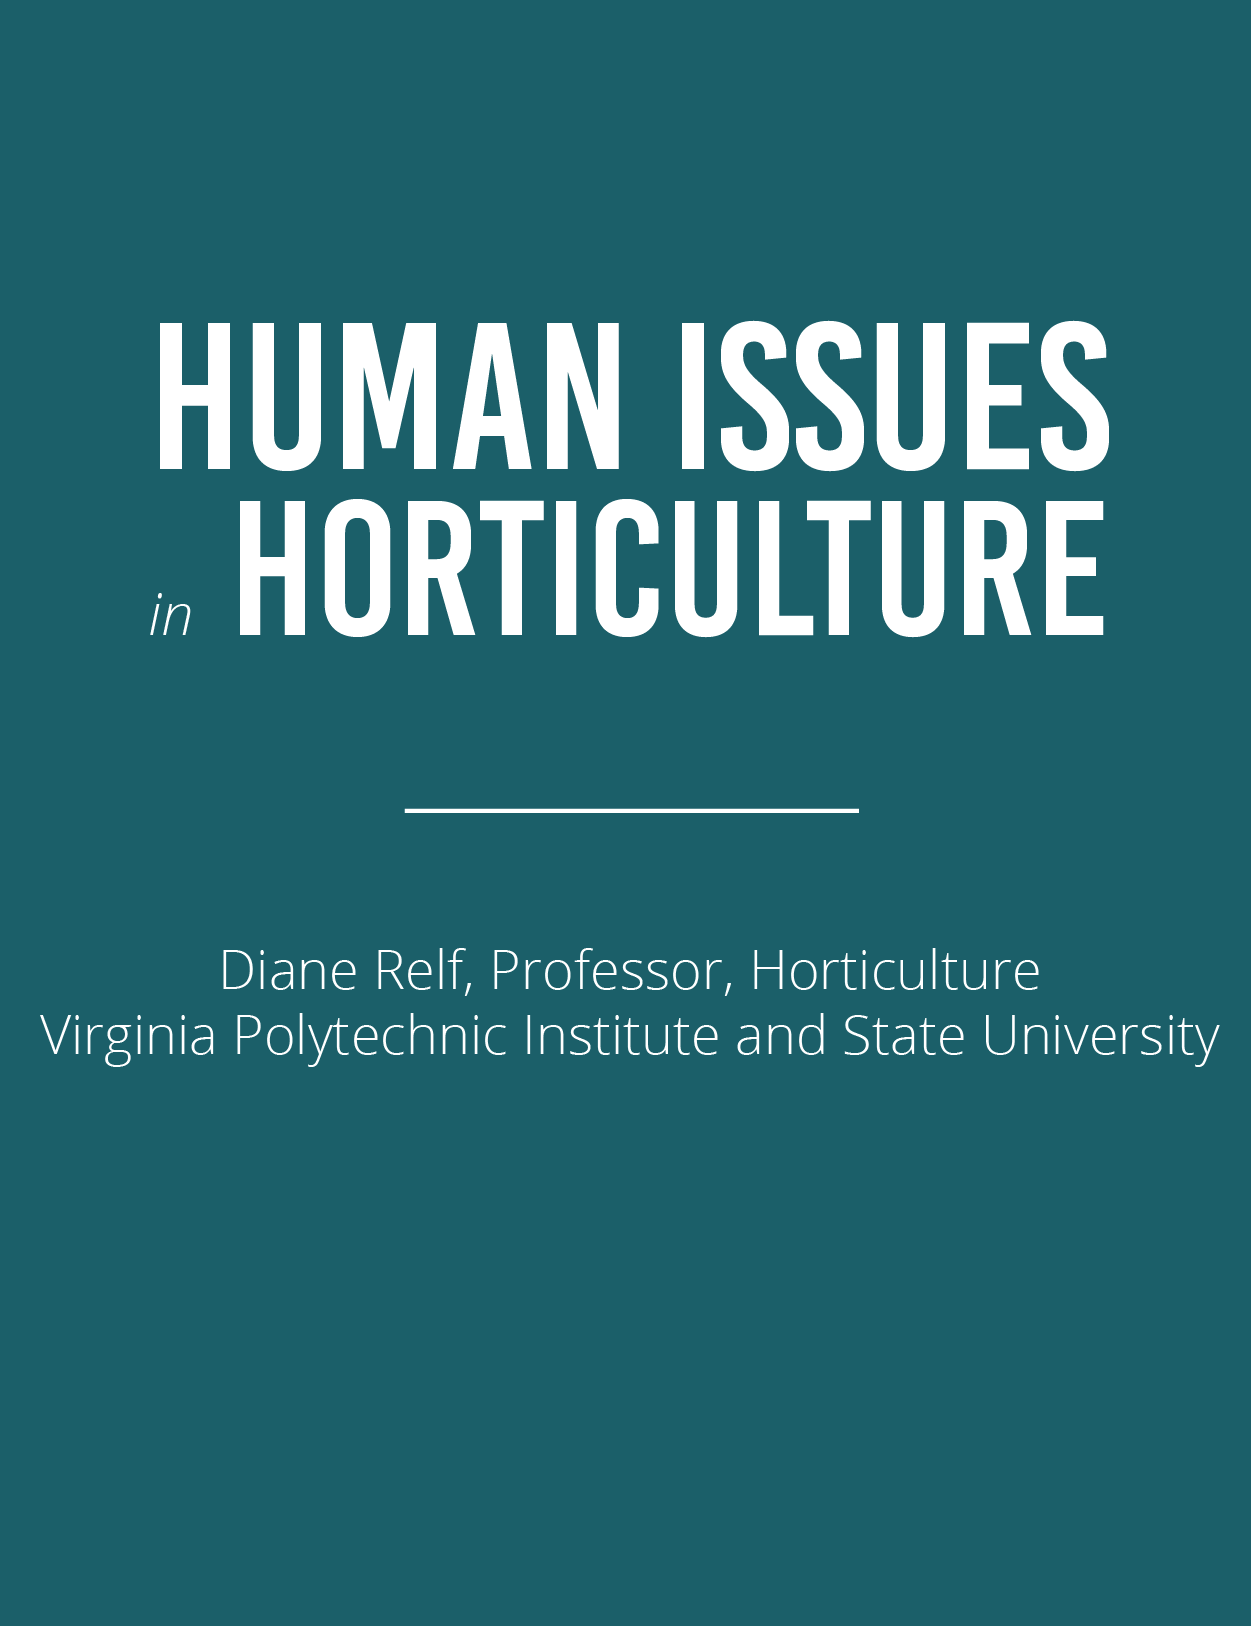 Human Issues in HorticultureFeatured Image